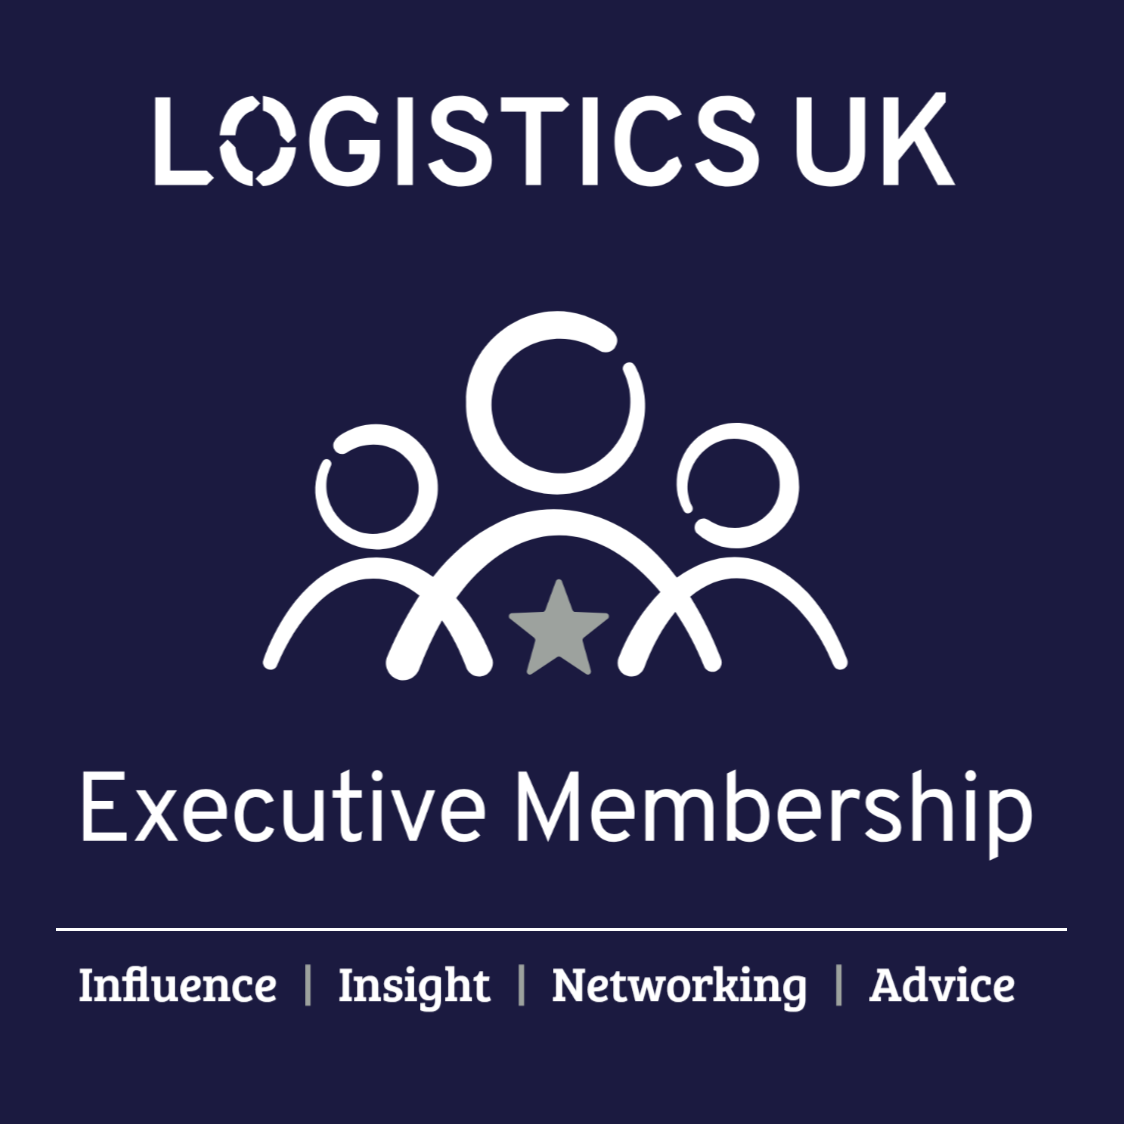 Keep logistics issues at the top table with Logistics UK’s Executive Membership